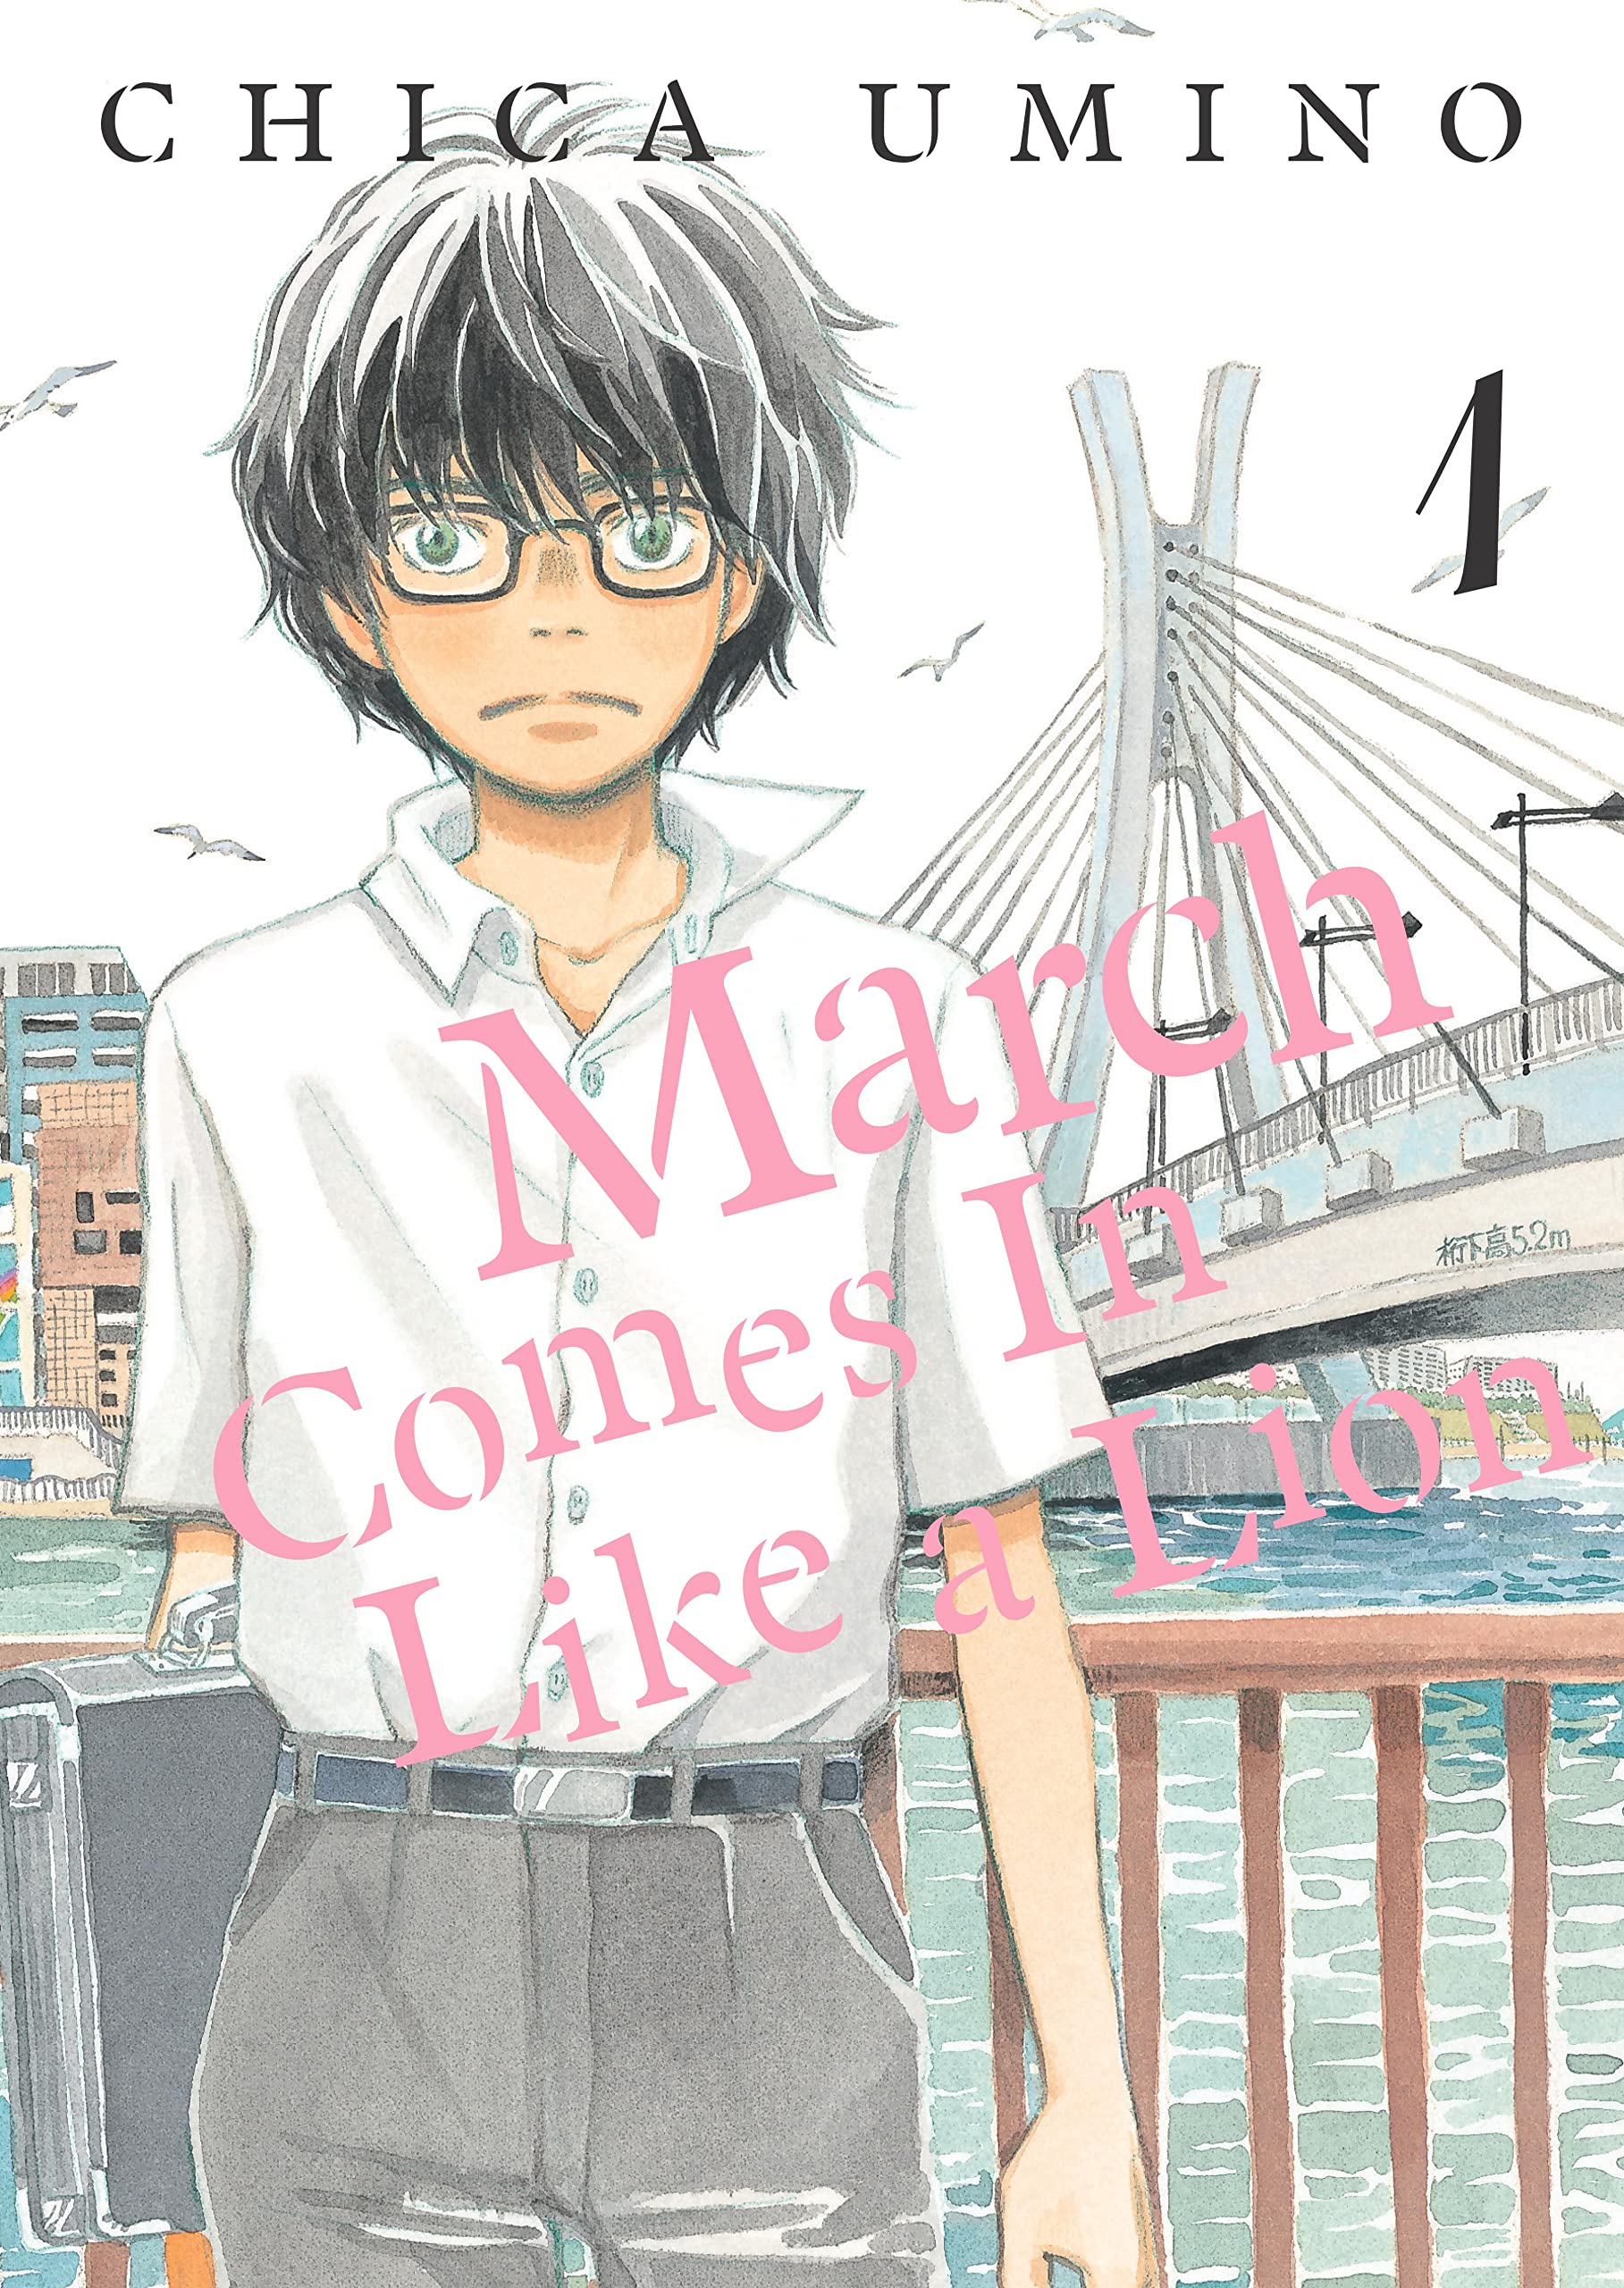 March Comes in Like a Lion Vol. 01